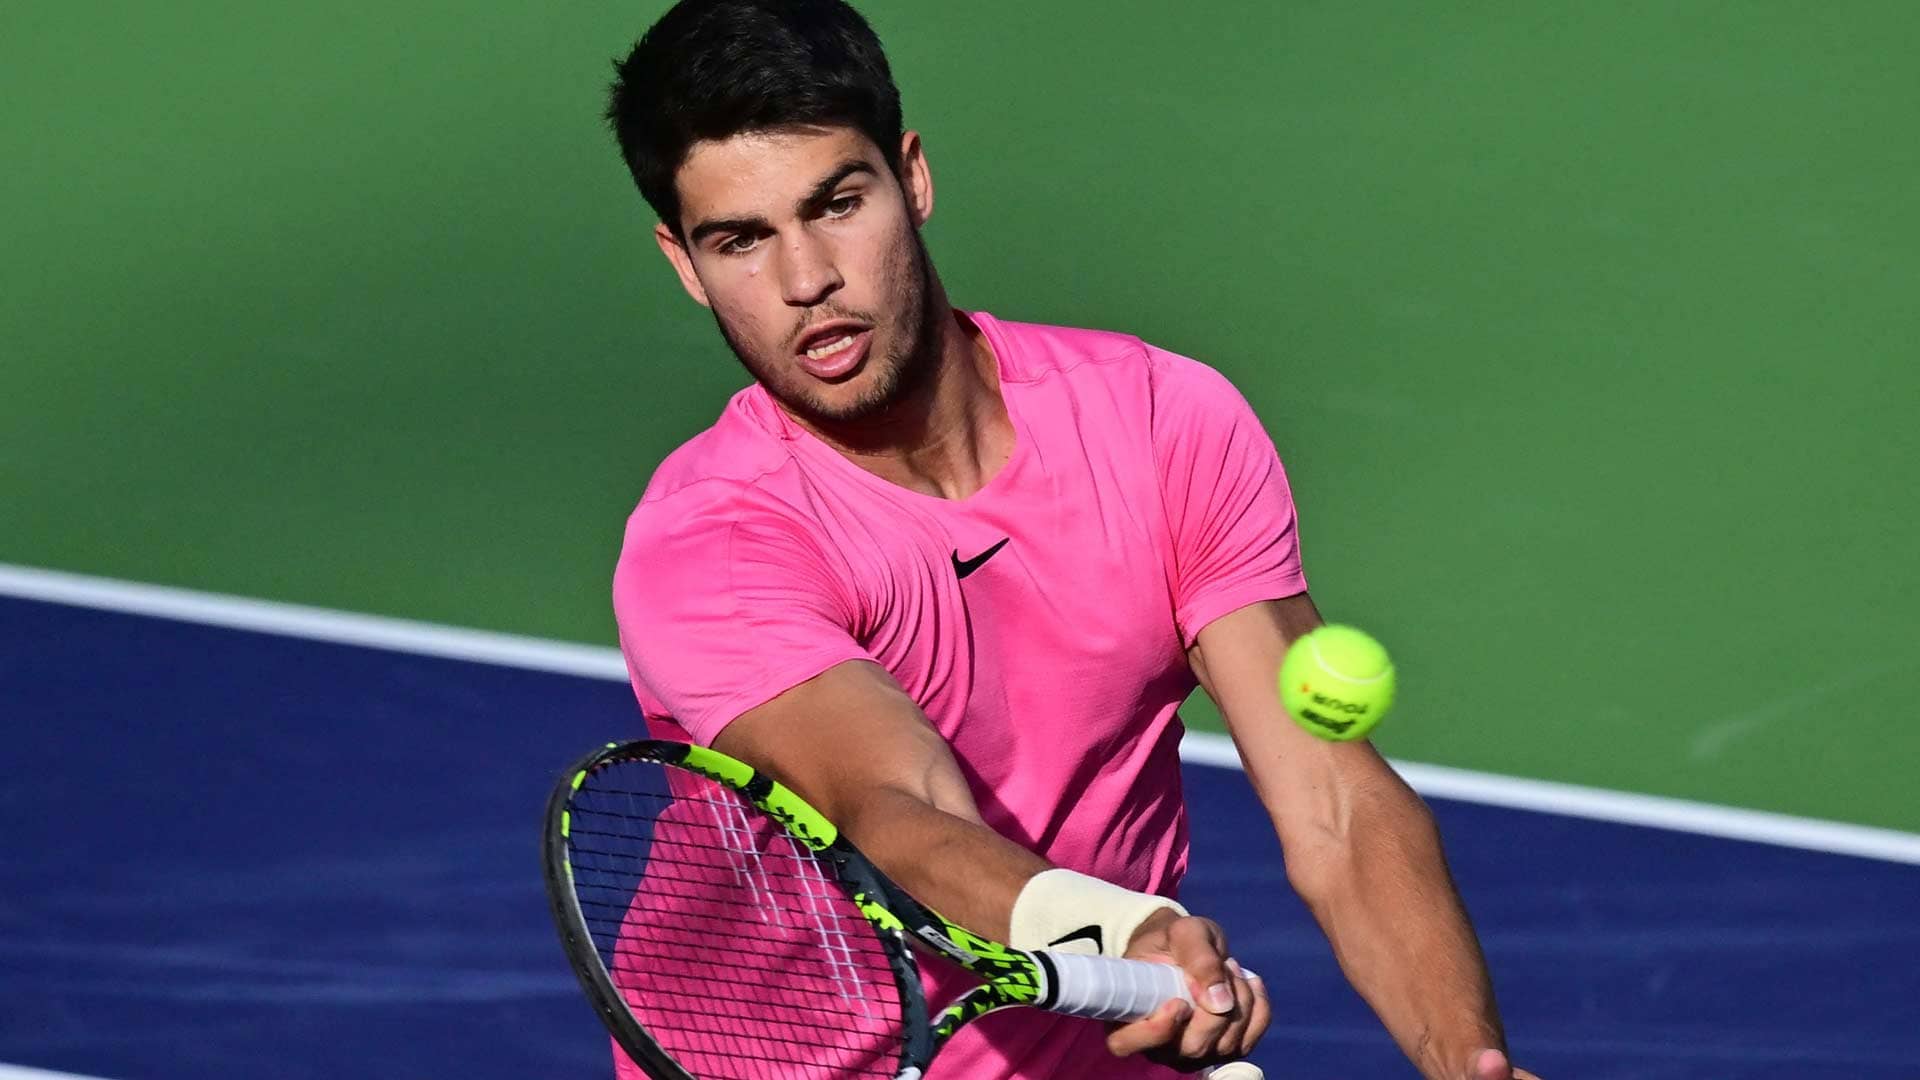 Carlos Alcaraz advanced to his first Indian Wells final with a straight-sets win against Jannik Sinner.